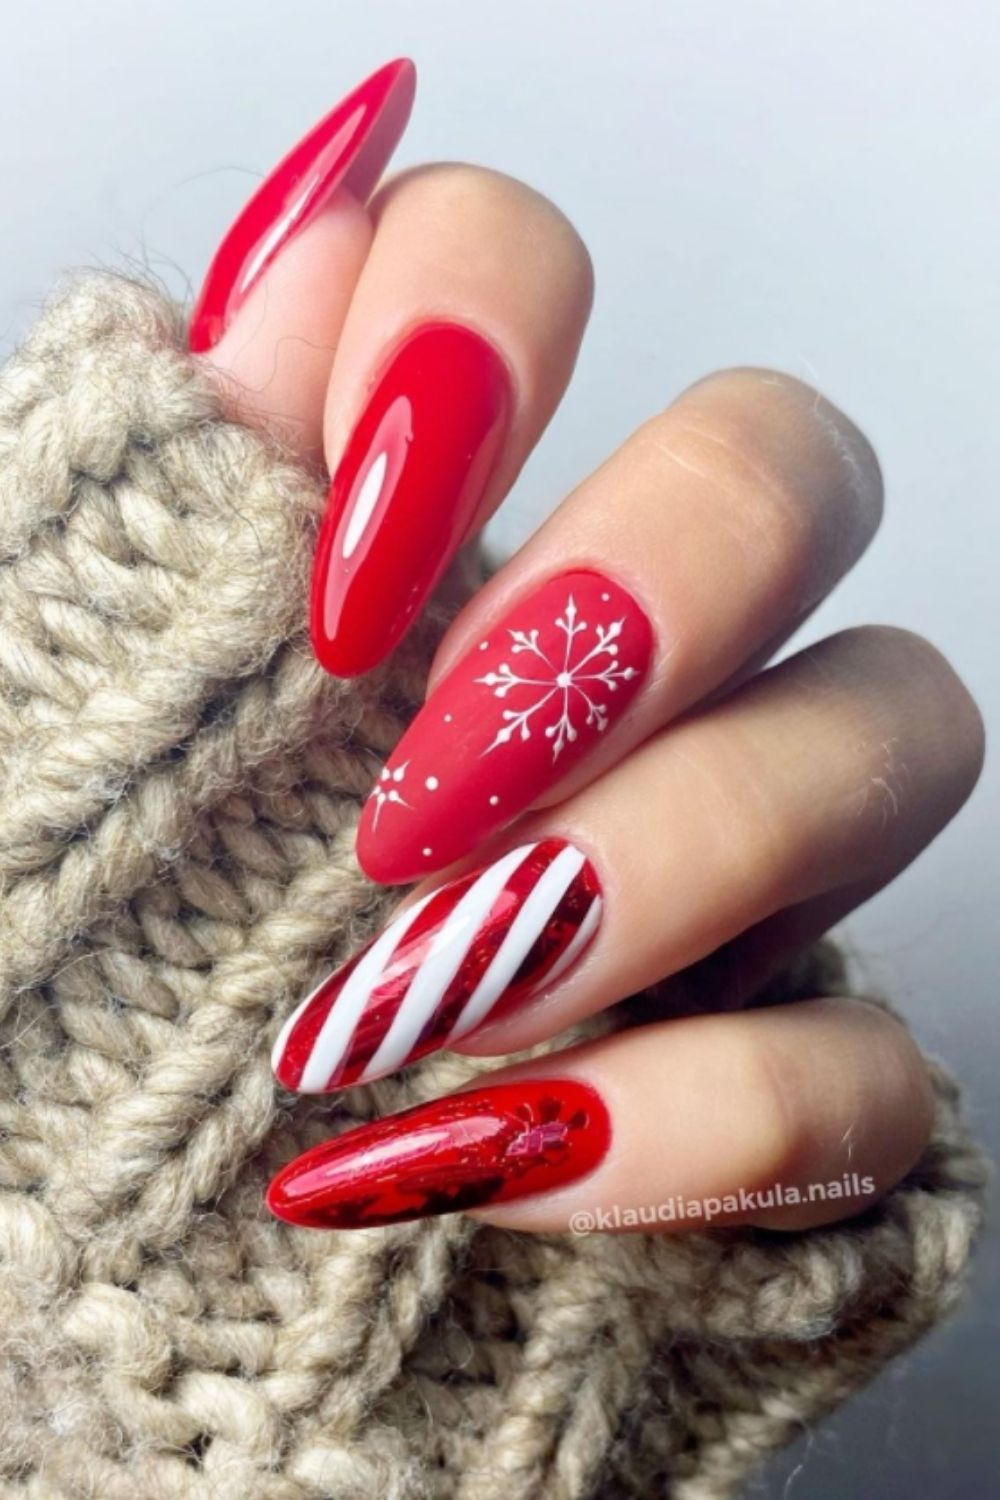 White and red almond nails with snowflake